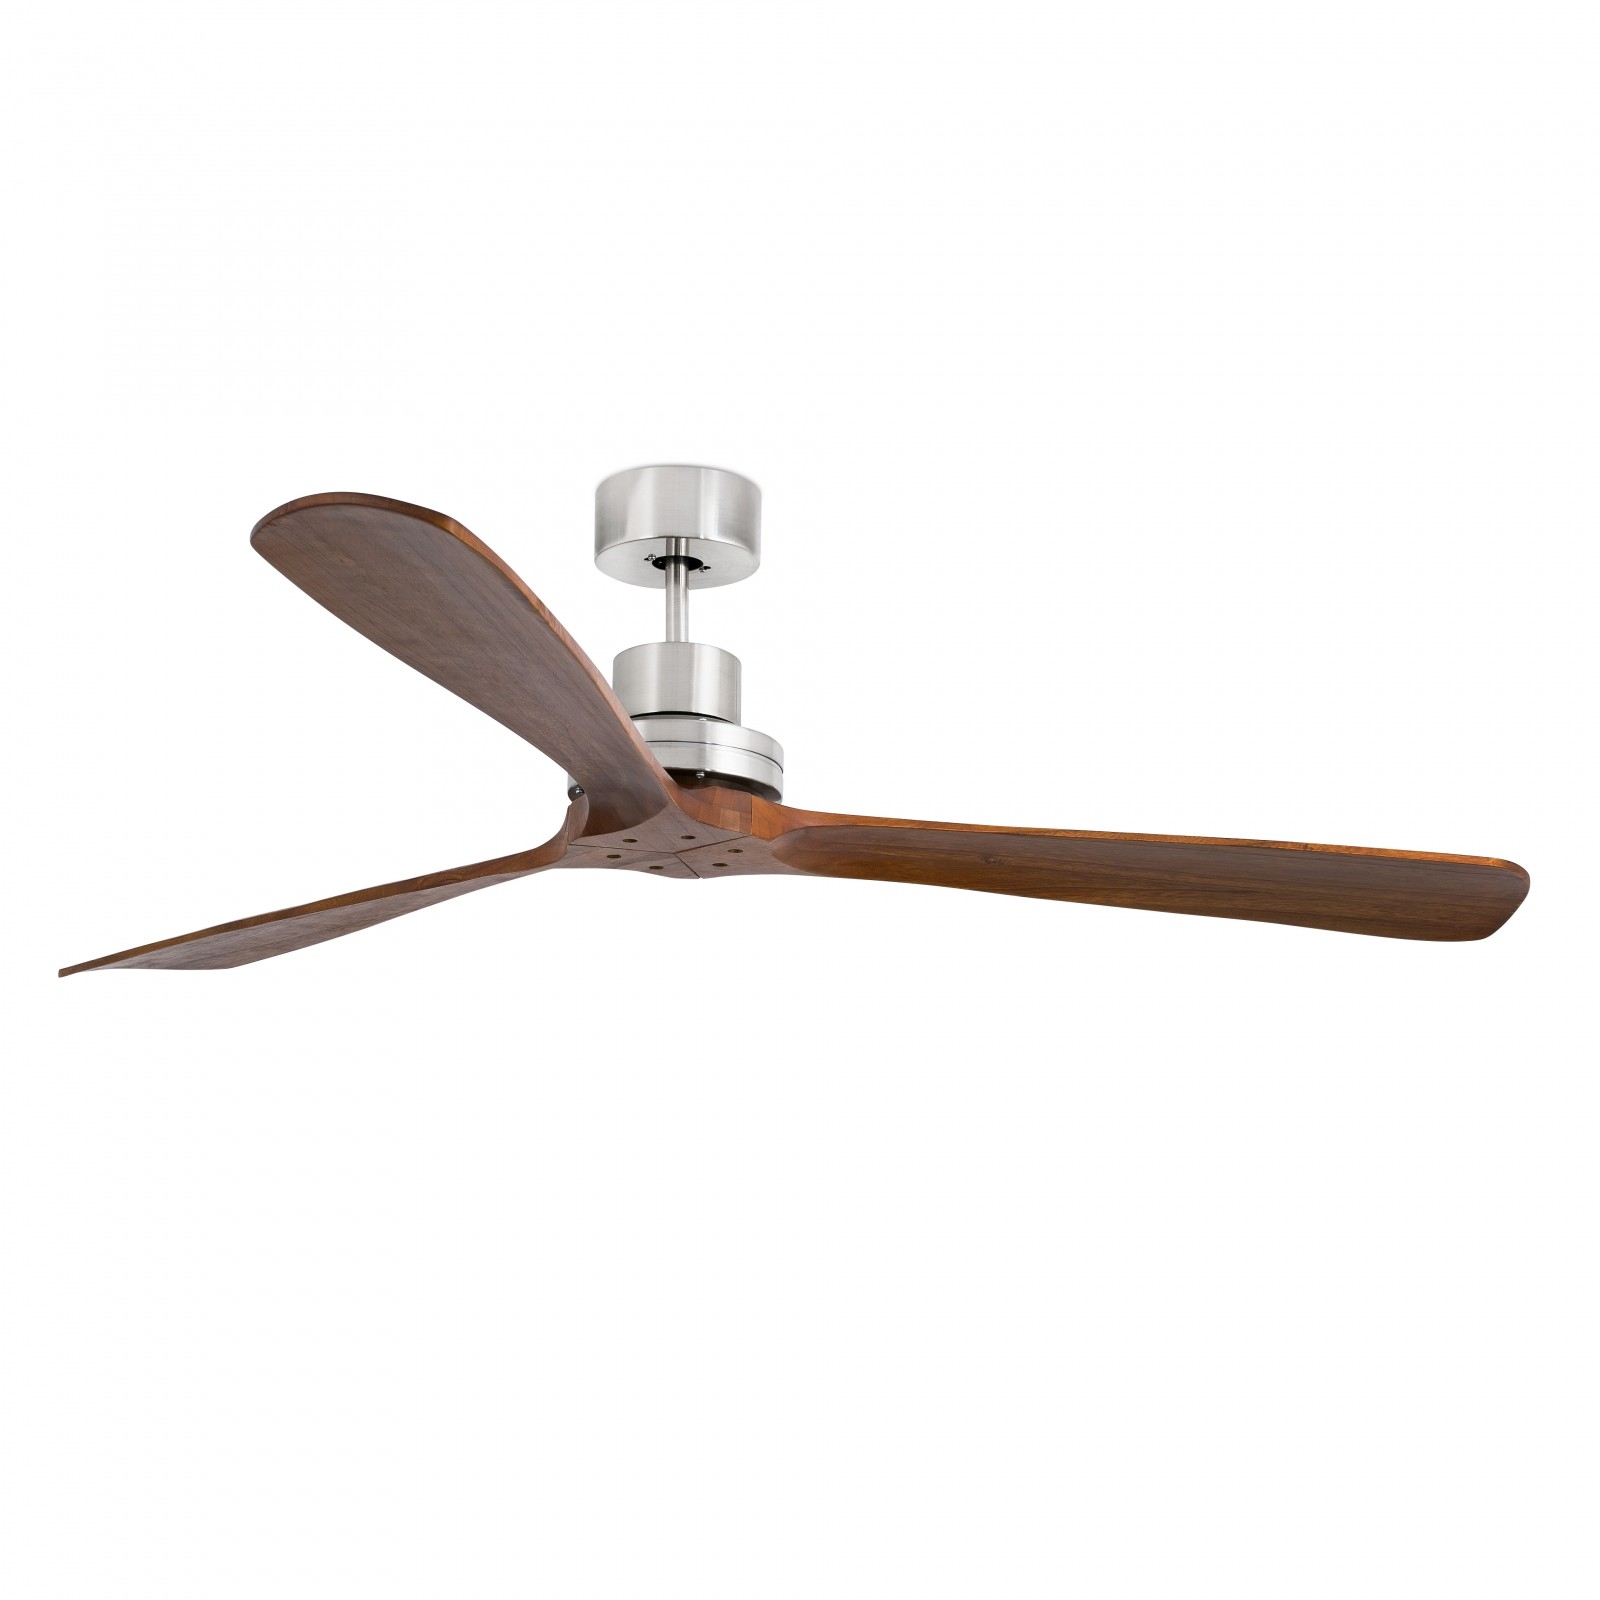 Permalink to Ceiling Fans Without Lights Remote Control